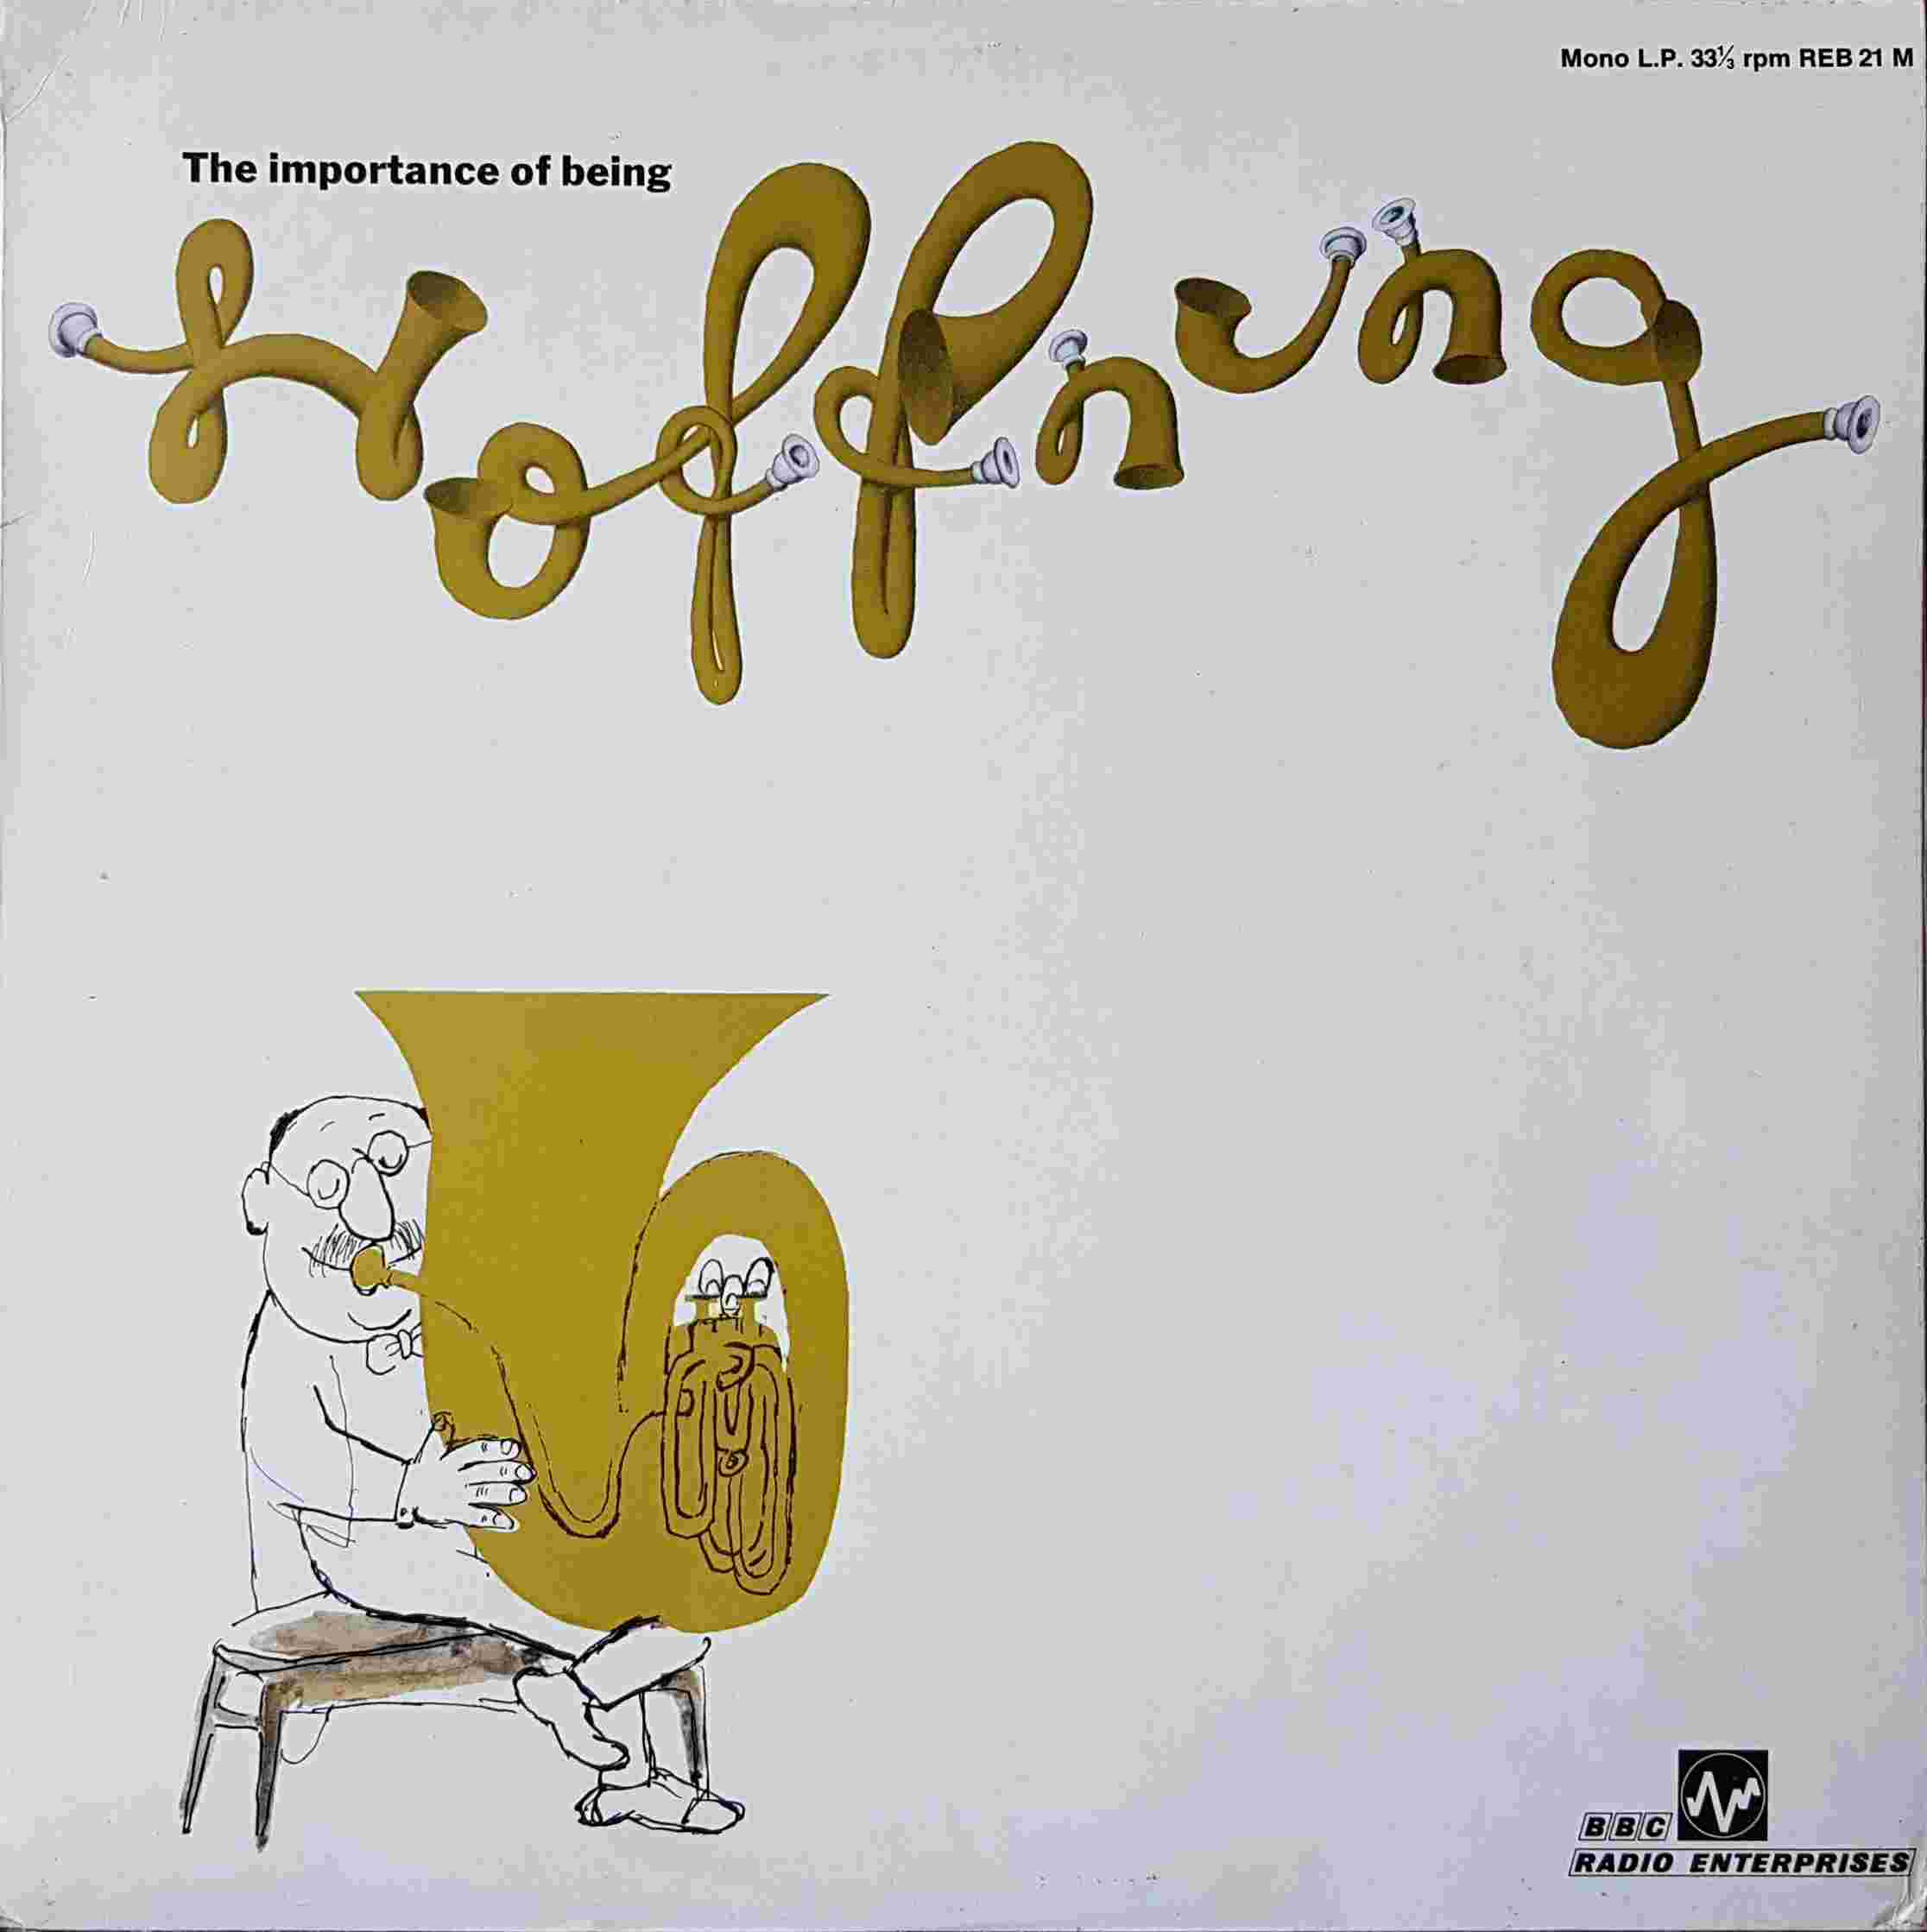 Picture of REB 21 The importance of being Hoffnung by artist Gerald Hoffnung / Charles Richardson from the BBC albums - Records and Tapes library